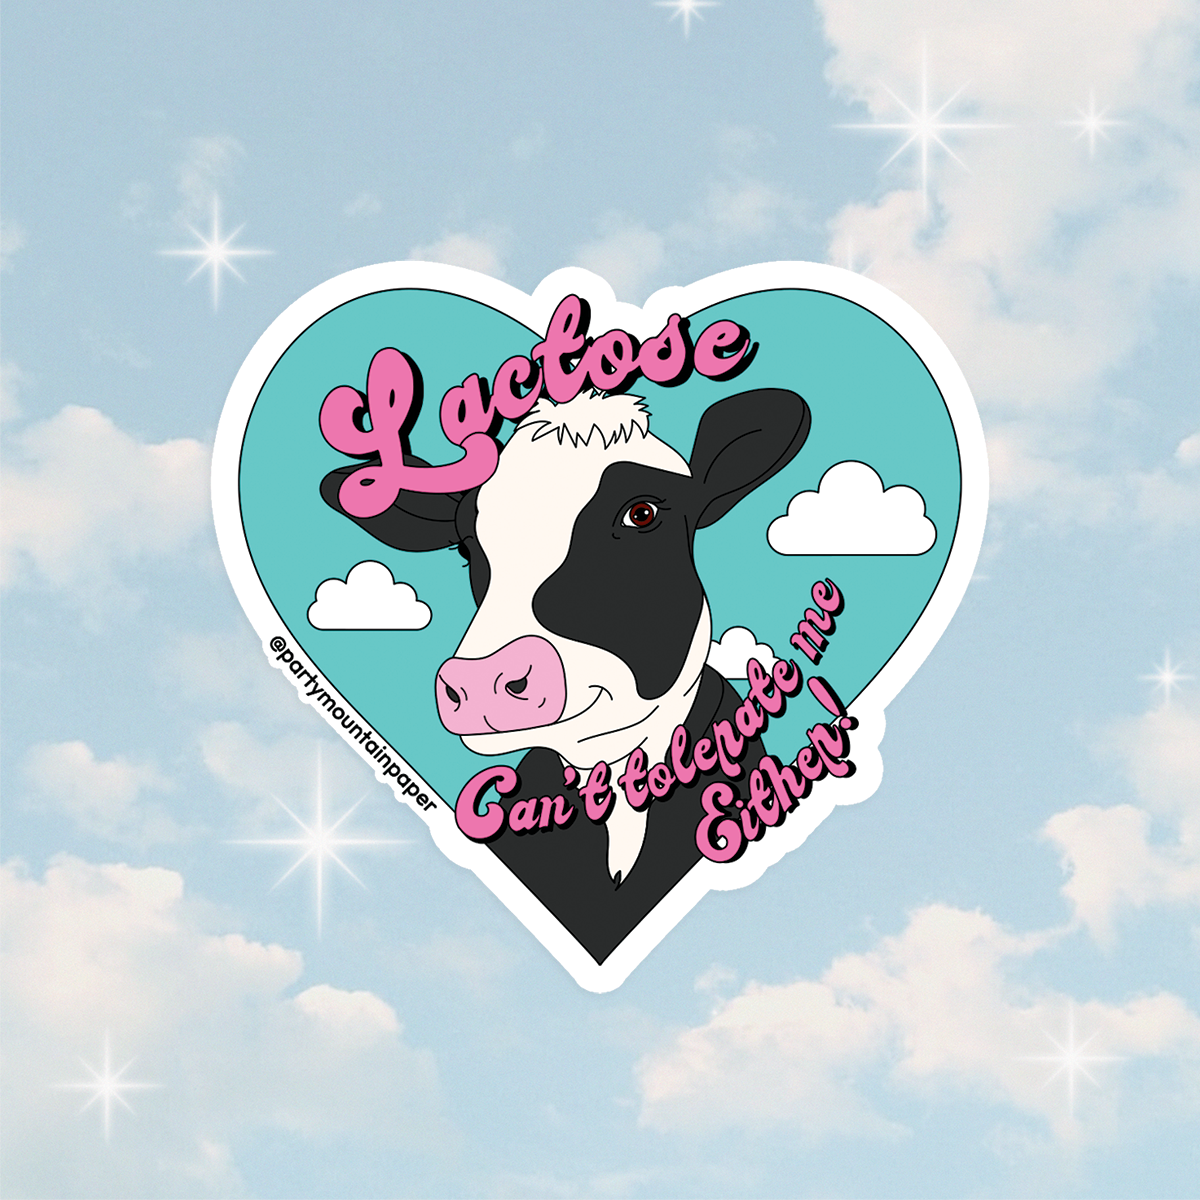 Lactose Can't Tolerate Me Sticker